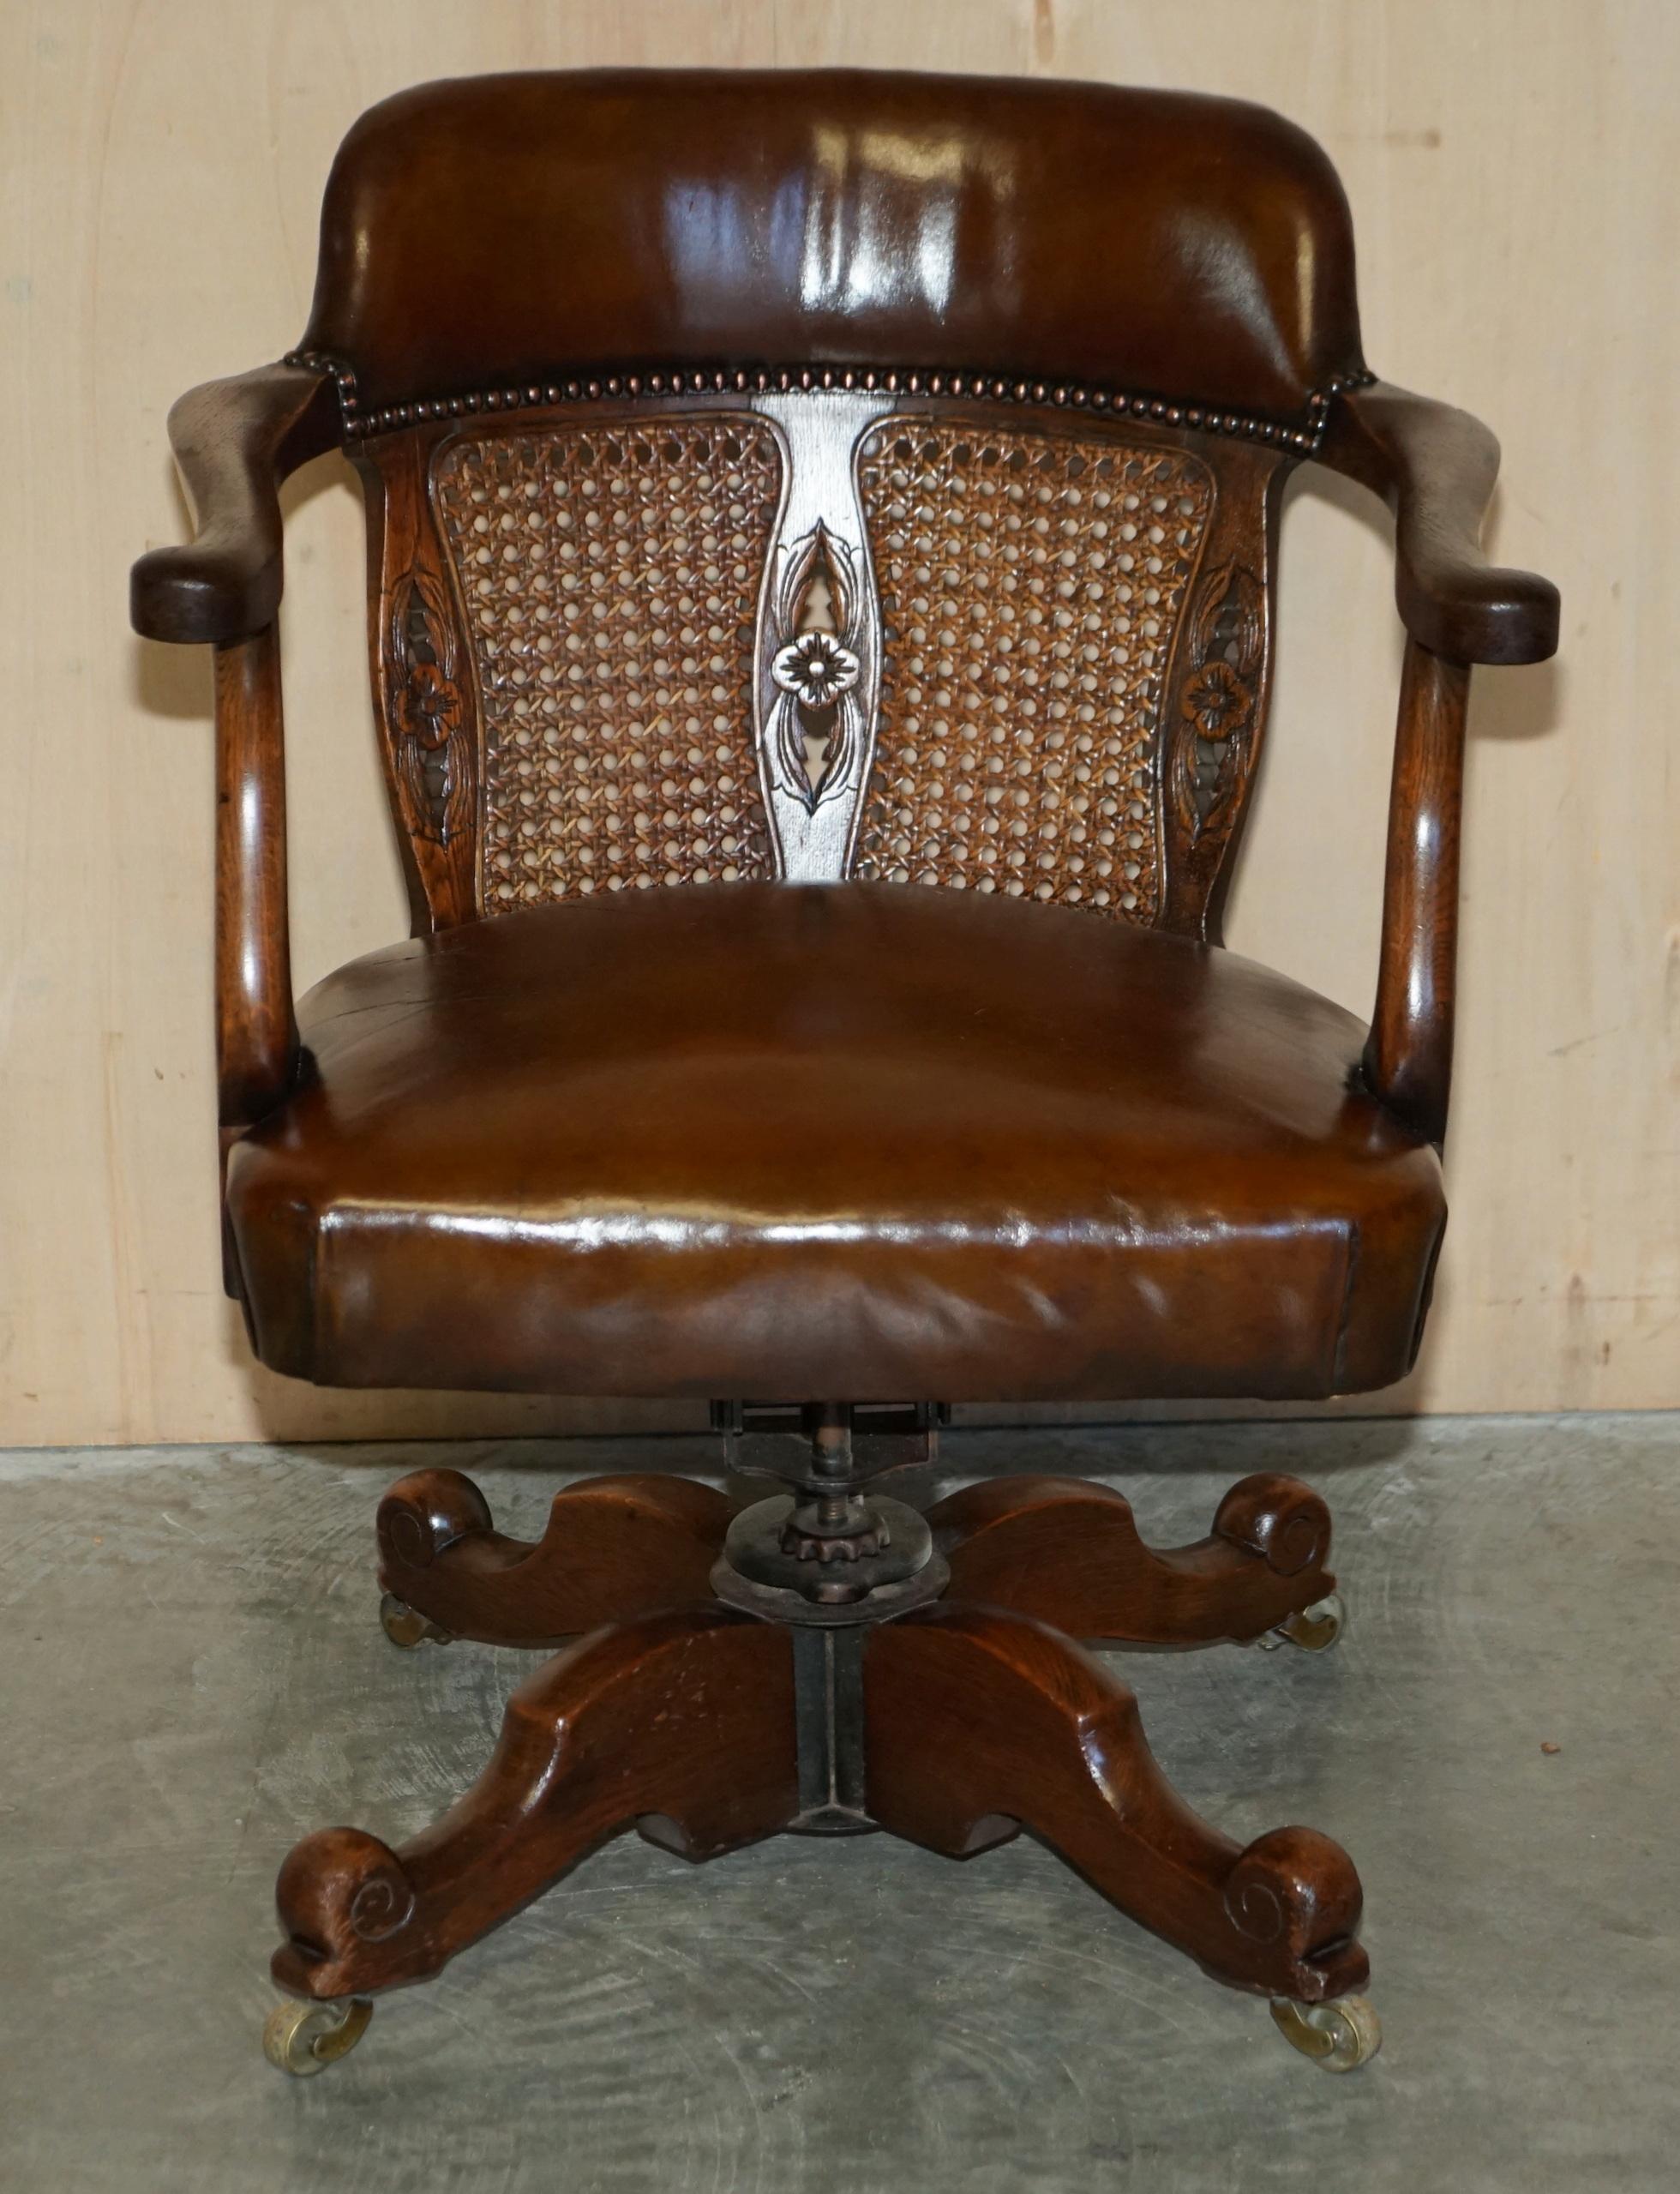 Royal House Antiques

Royal House Antiques is delighted to offer for sale this fully restored circa 1880 Barrell back Bergere and hand dyed brown leather office chair with original wrought iron swivel movement on English Oak base

Please note the